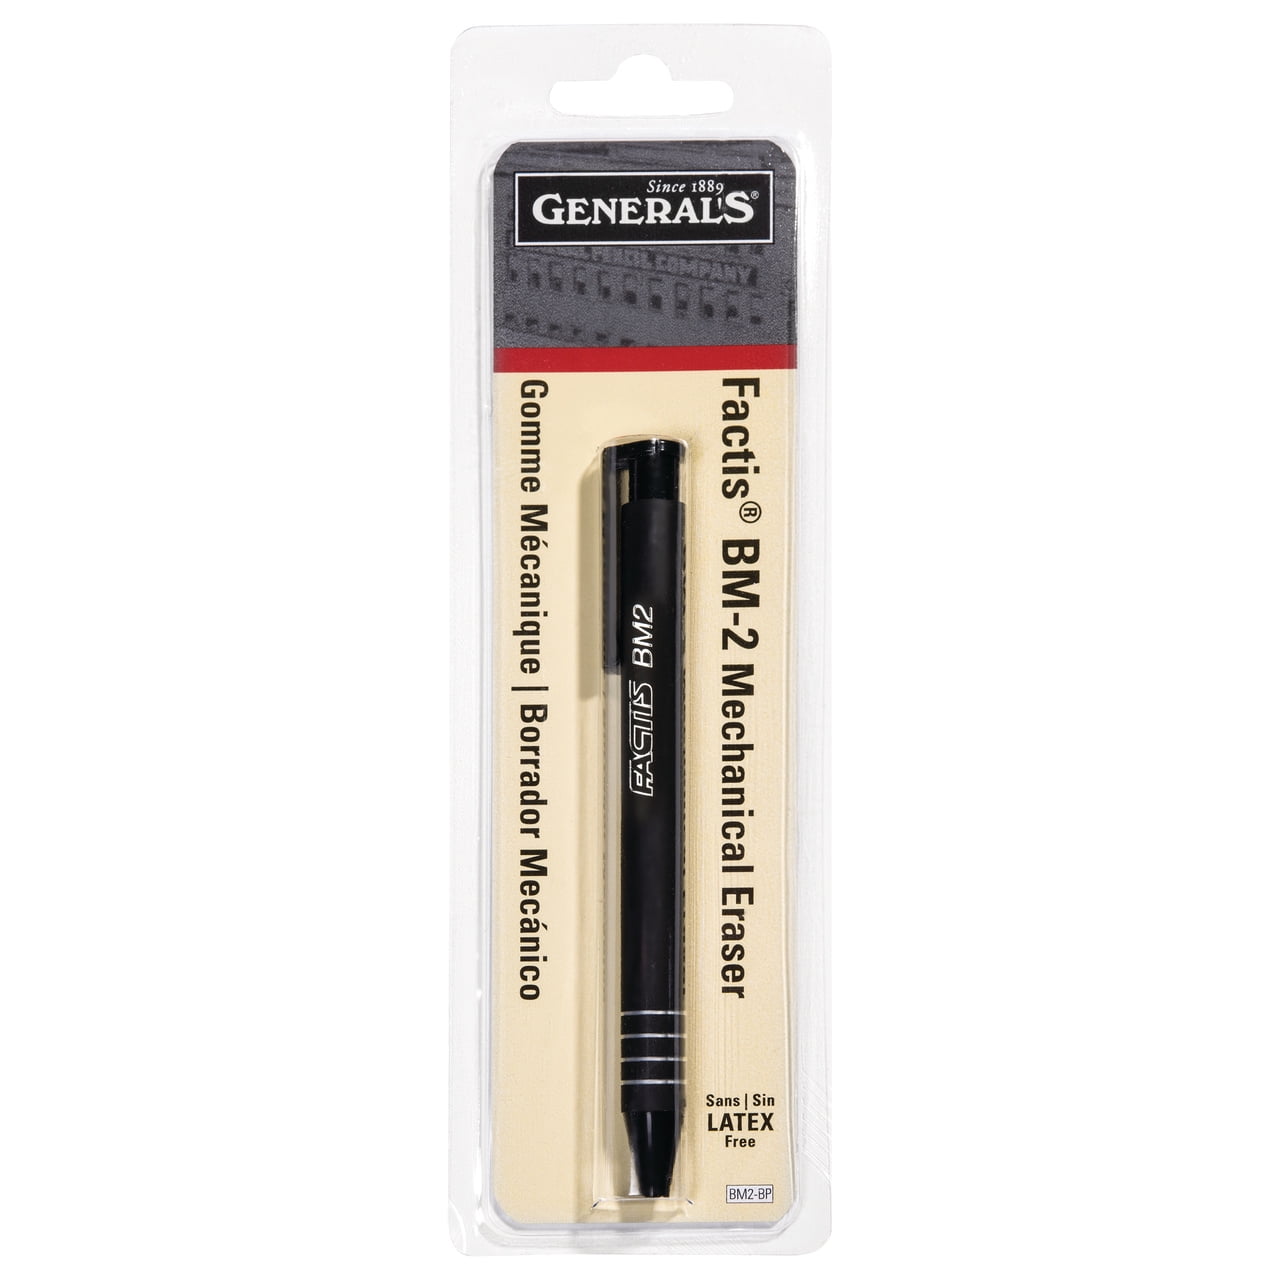 Electric Eraser Pen - With Refills, Shop Today. Get it Tomorrow!